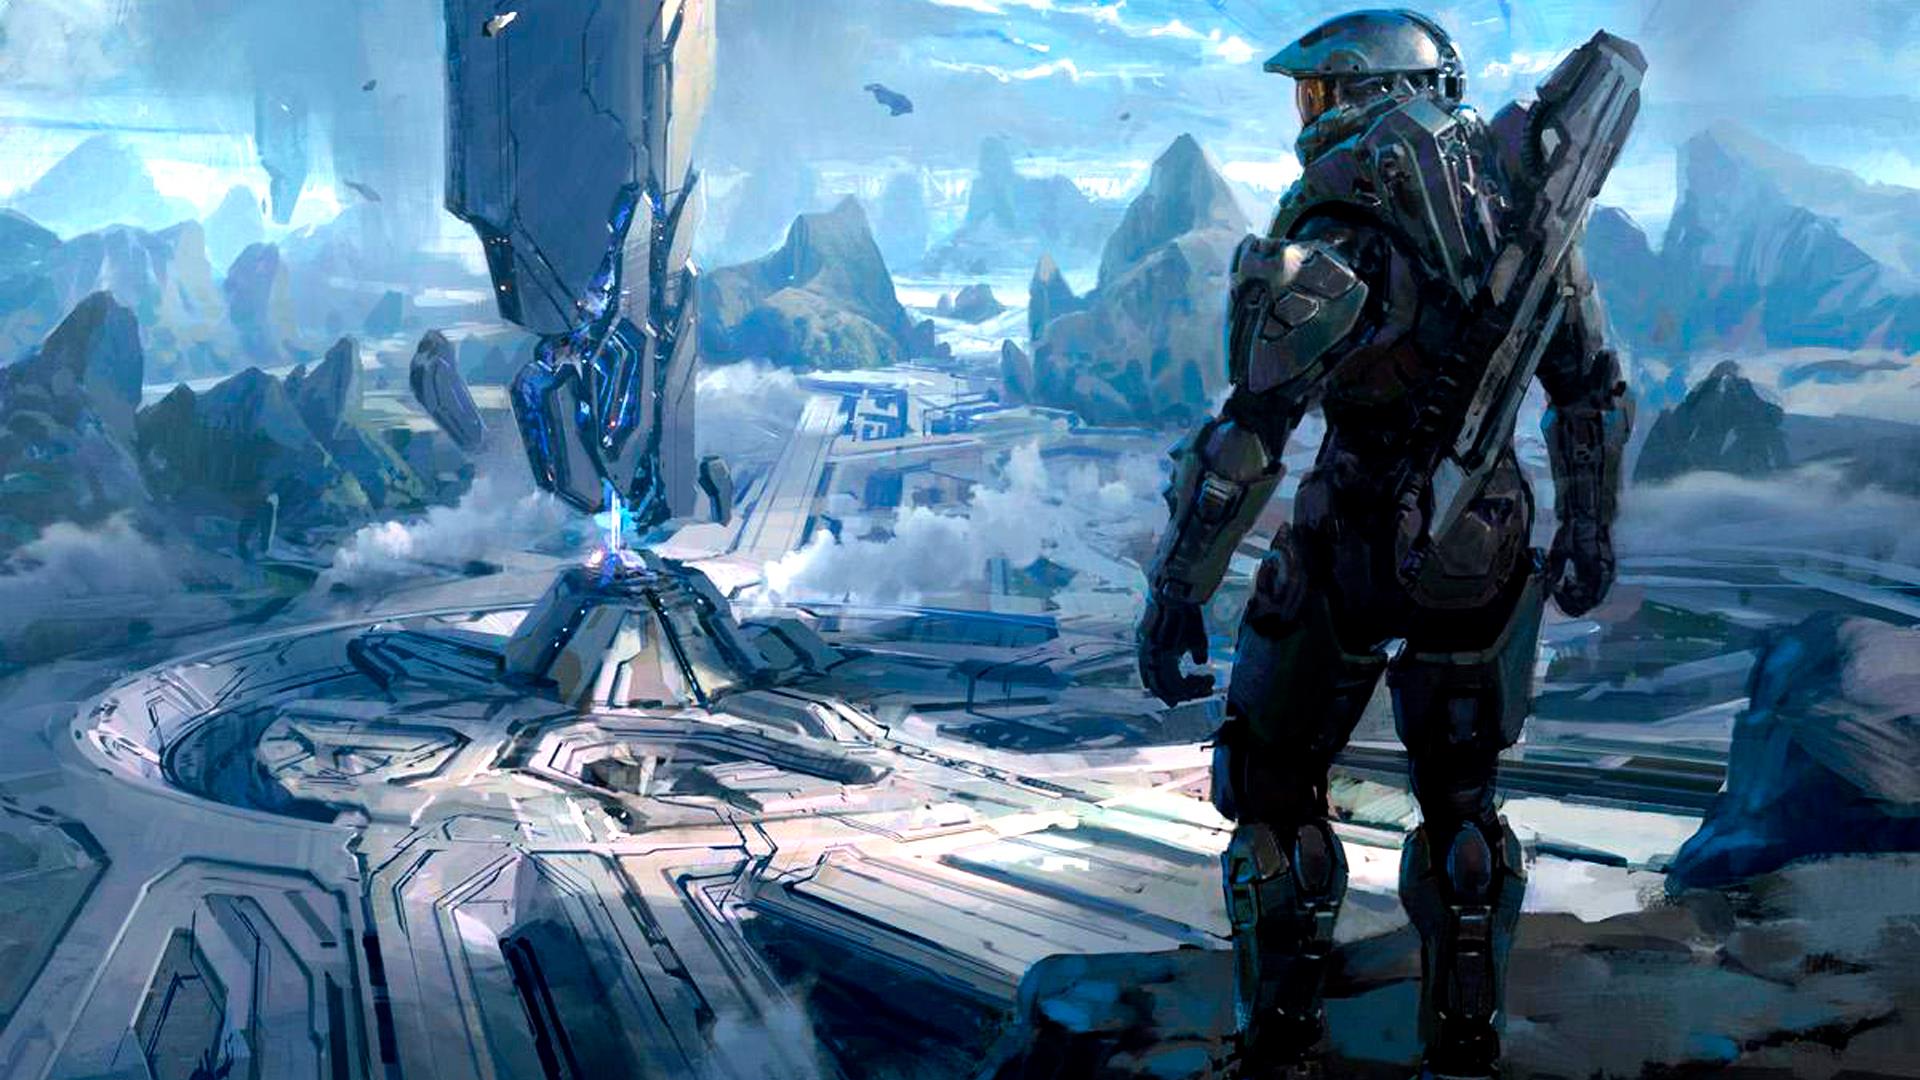 Halo 4 Wallpapers 1920x1080 - Wallpaper Cave